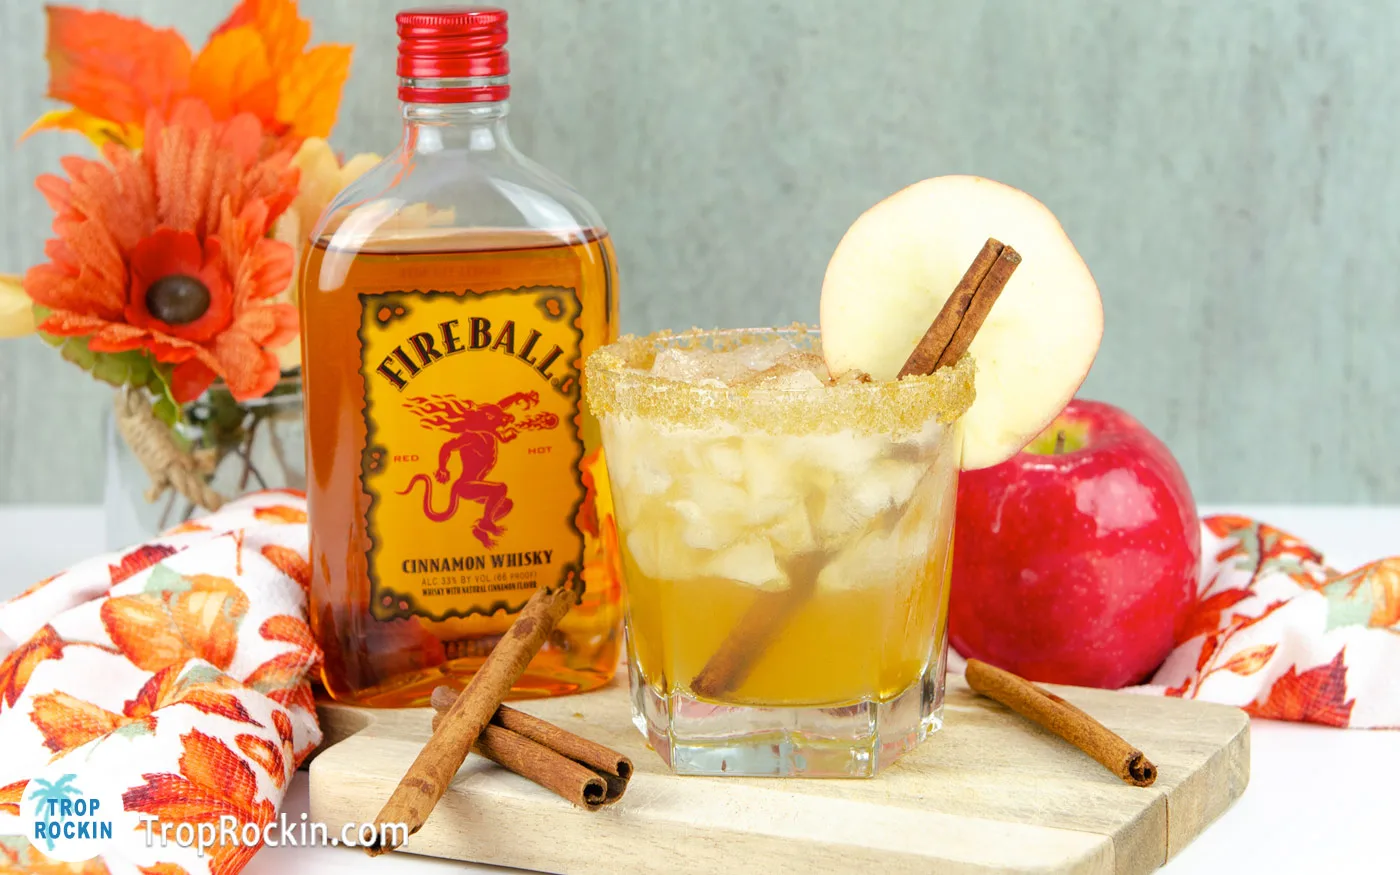 Apple pie cocktail in a lowball glass with a brown sugar rim, cinnamon stick and apple wheel for garnish sitting on a cutting board with Fireball Cinnamon Whisky and a red apple in the background.